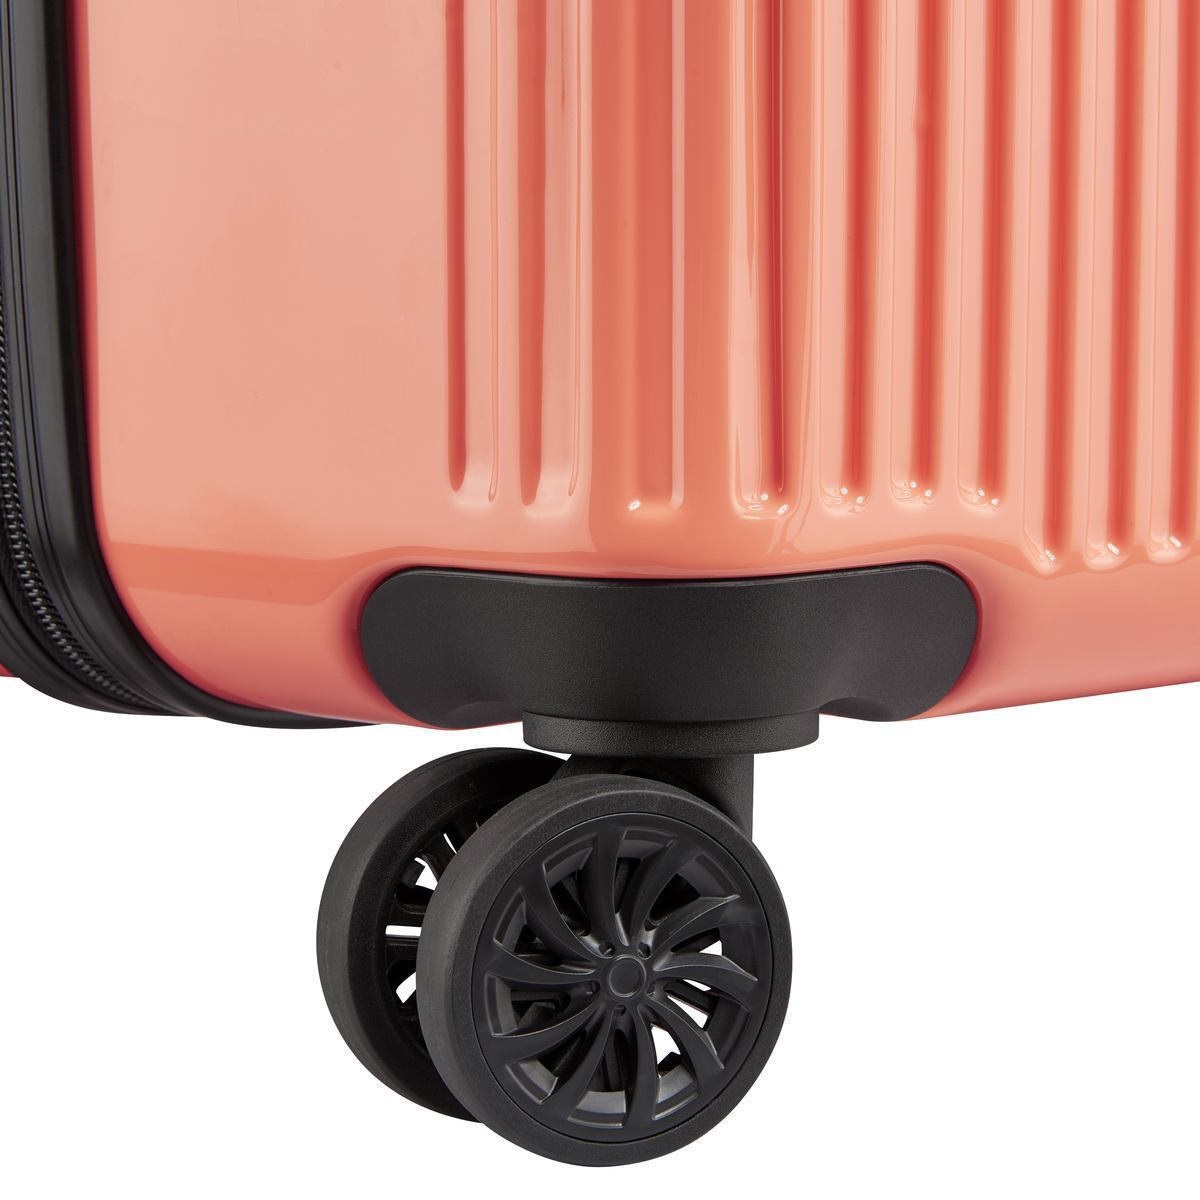 VALI DELSEY PARIS LARGE TRUNK OPHELIE 4 DOUBLE WHEEL EXPANDABLE TROLLEY CORAL PINK SUITCASE 2